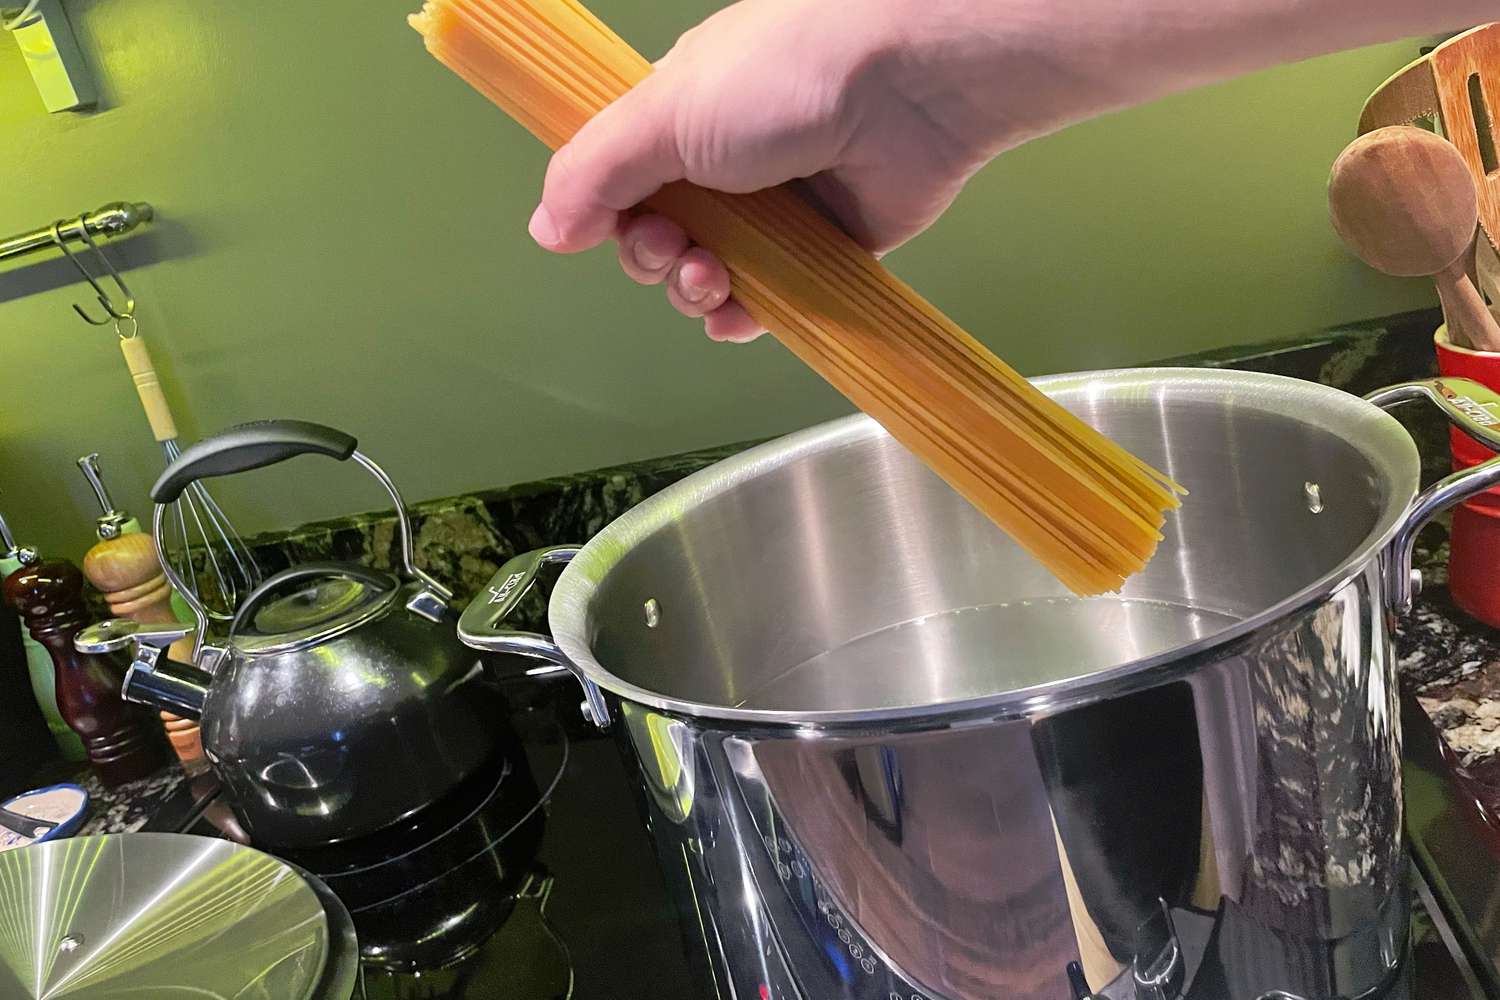 Adding dried pasta to the All-Clad D3 12-quart stockpot